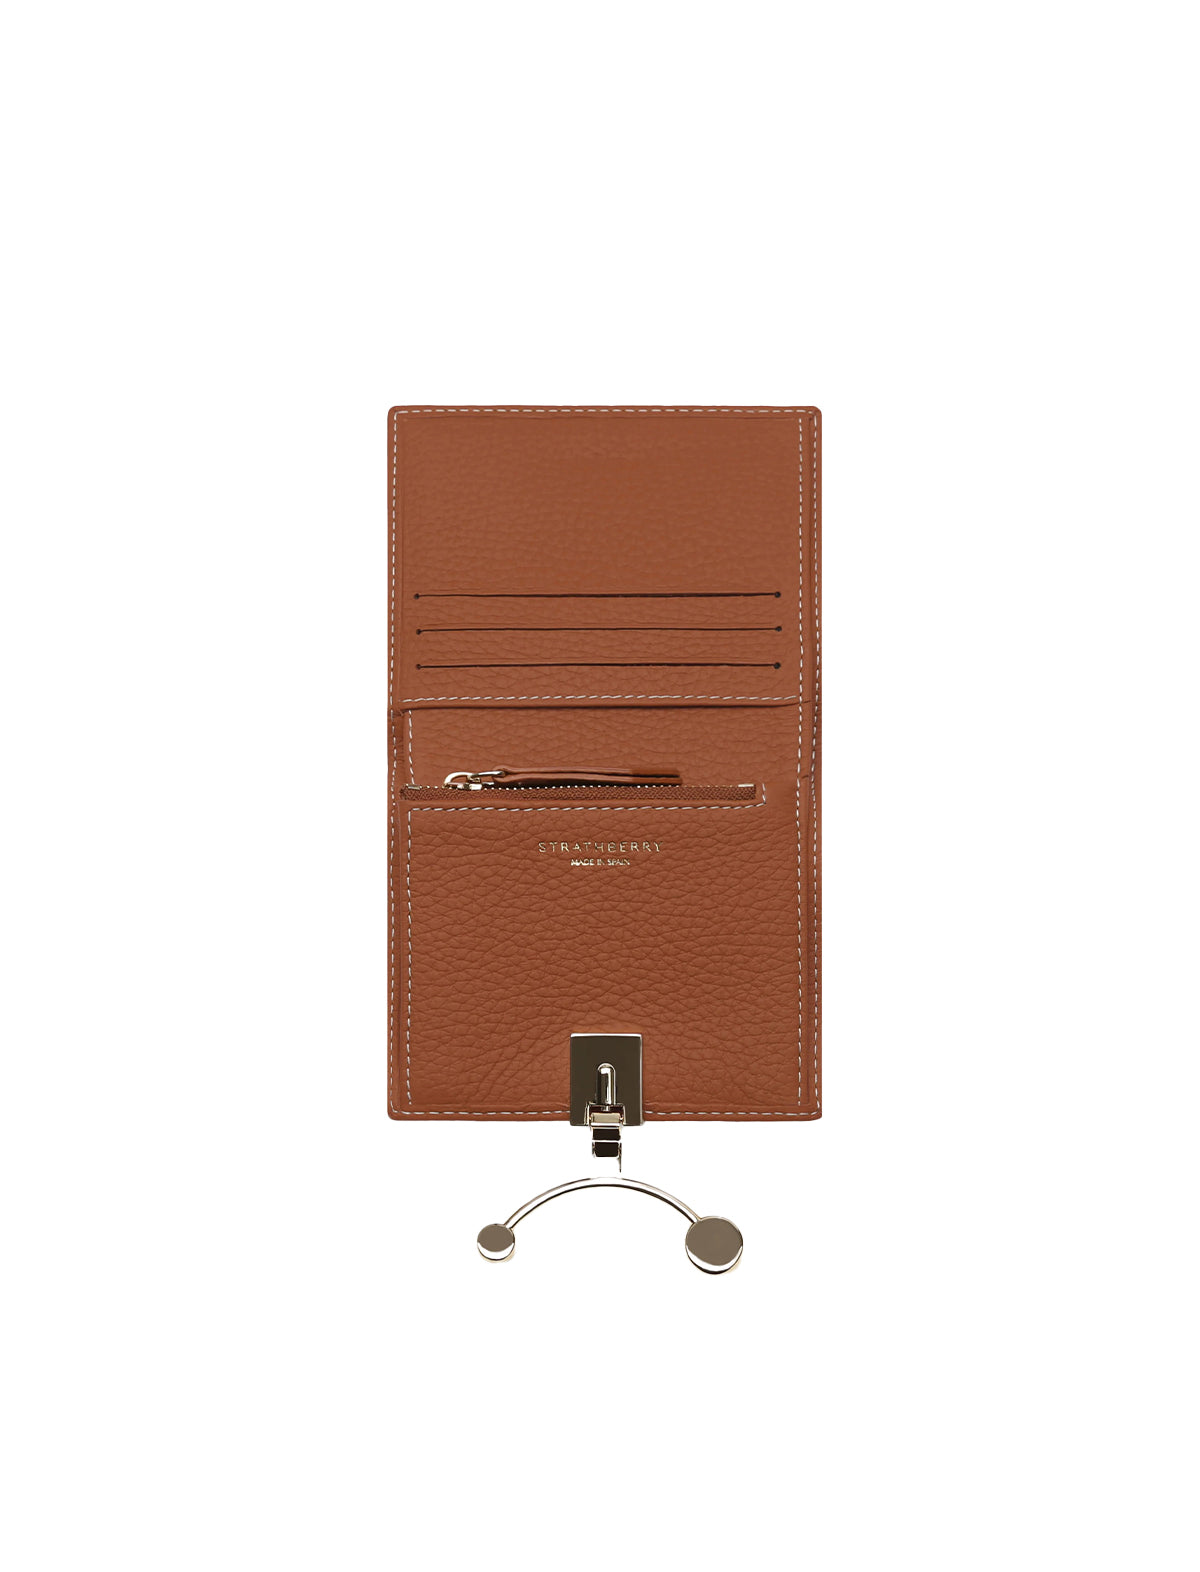 STRATHBERRY Crescent Wallet in Grain Leather Tan